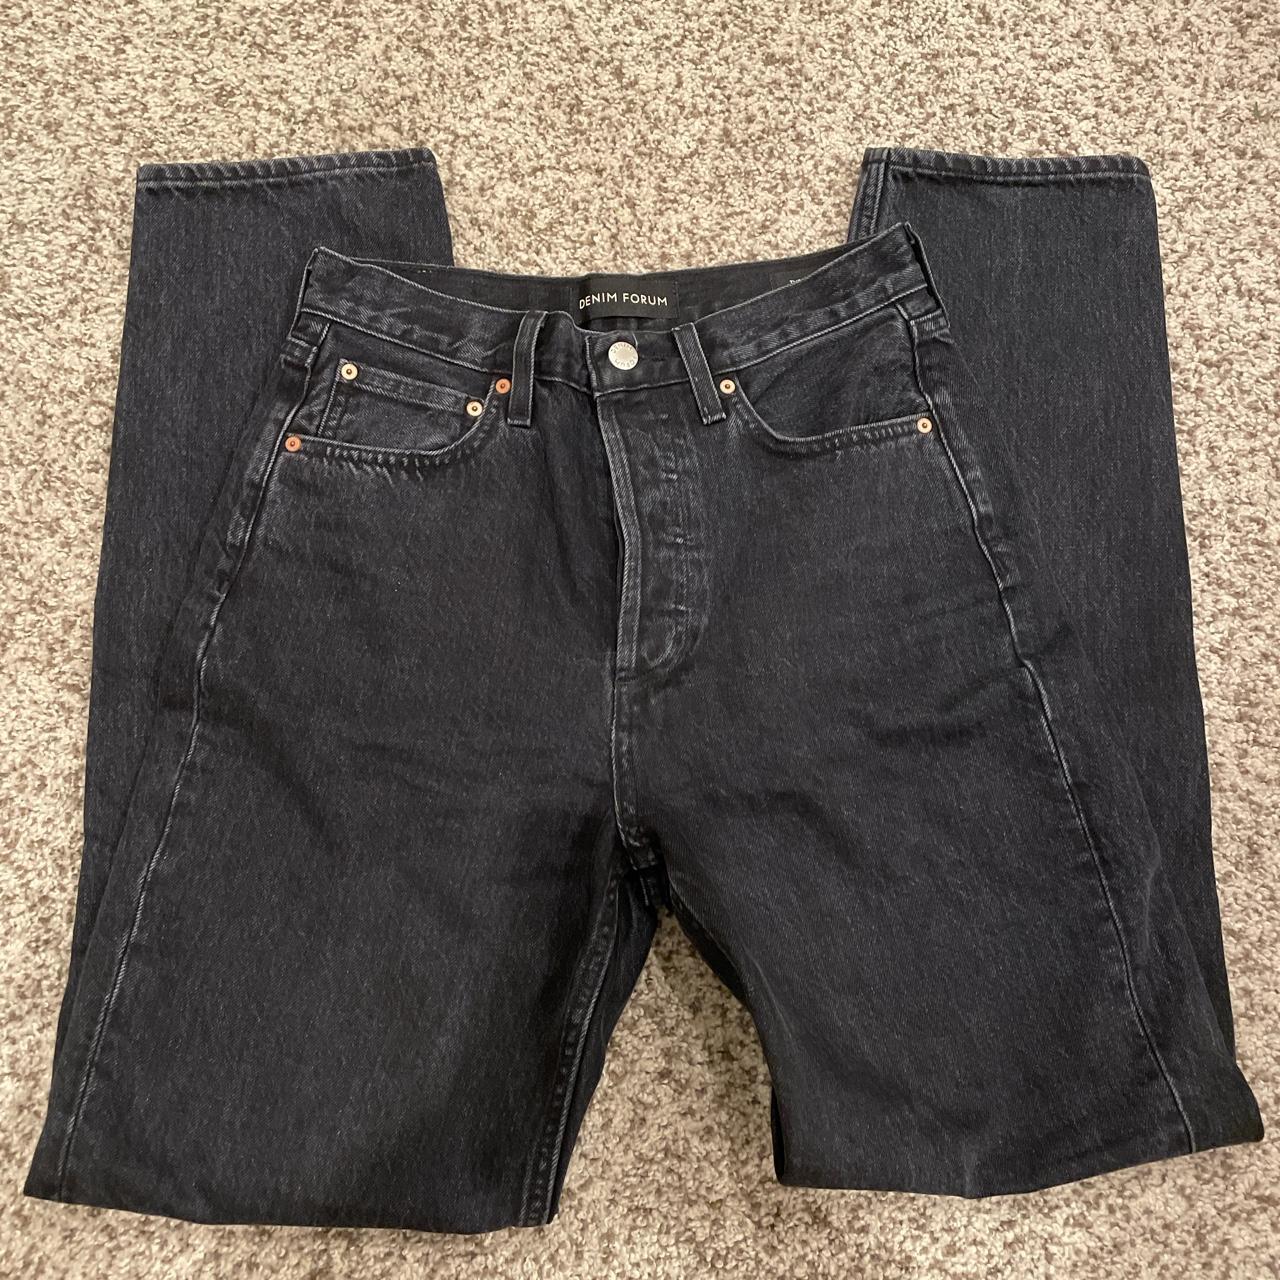 Patch pockets  Men's Clothing Forums